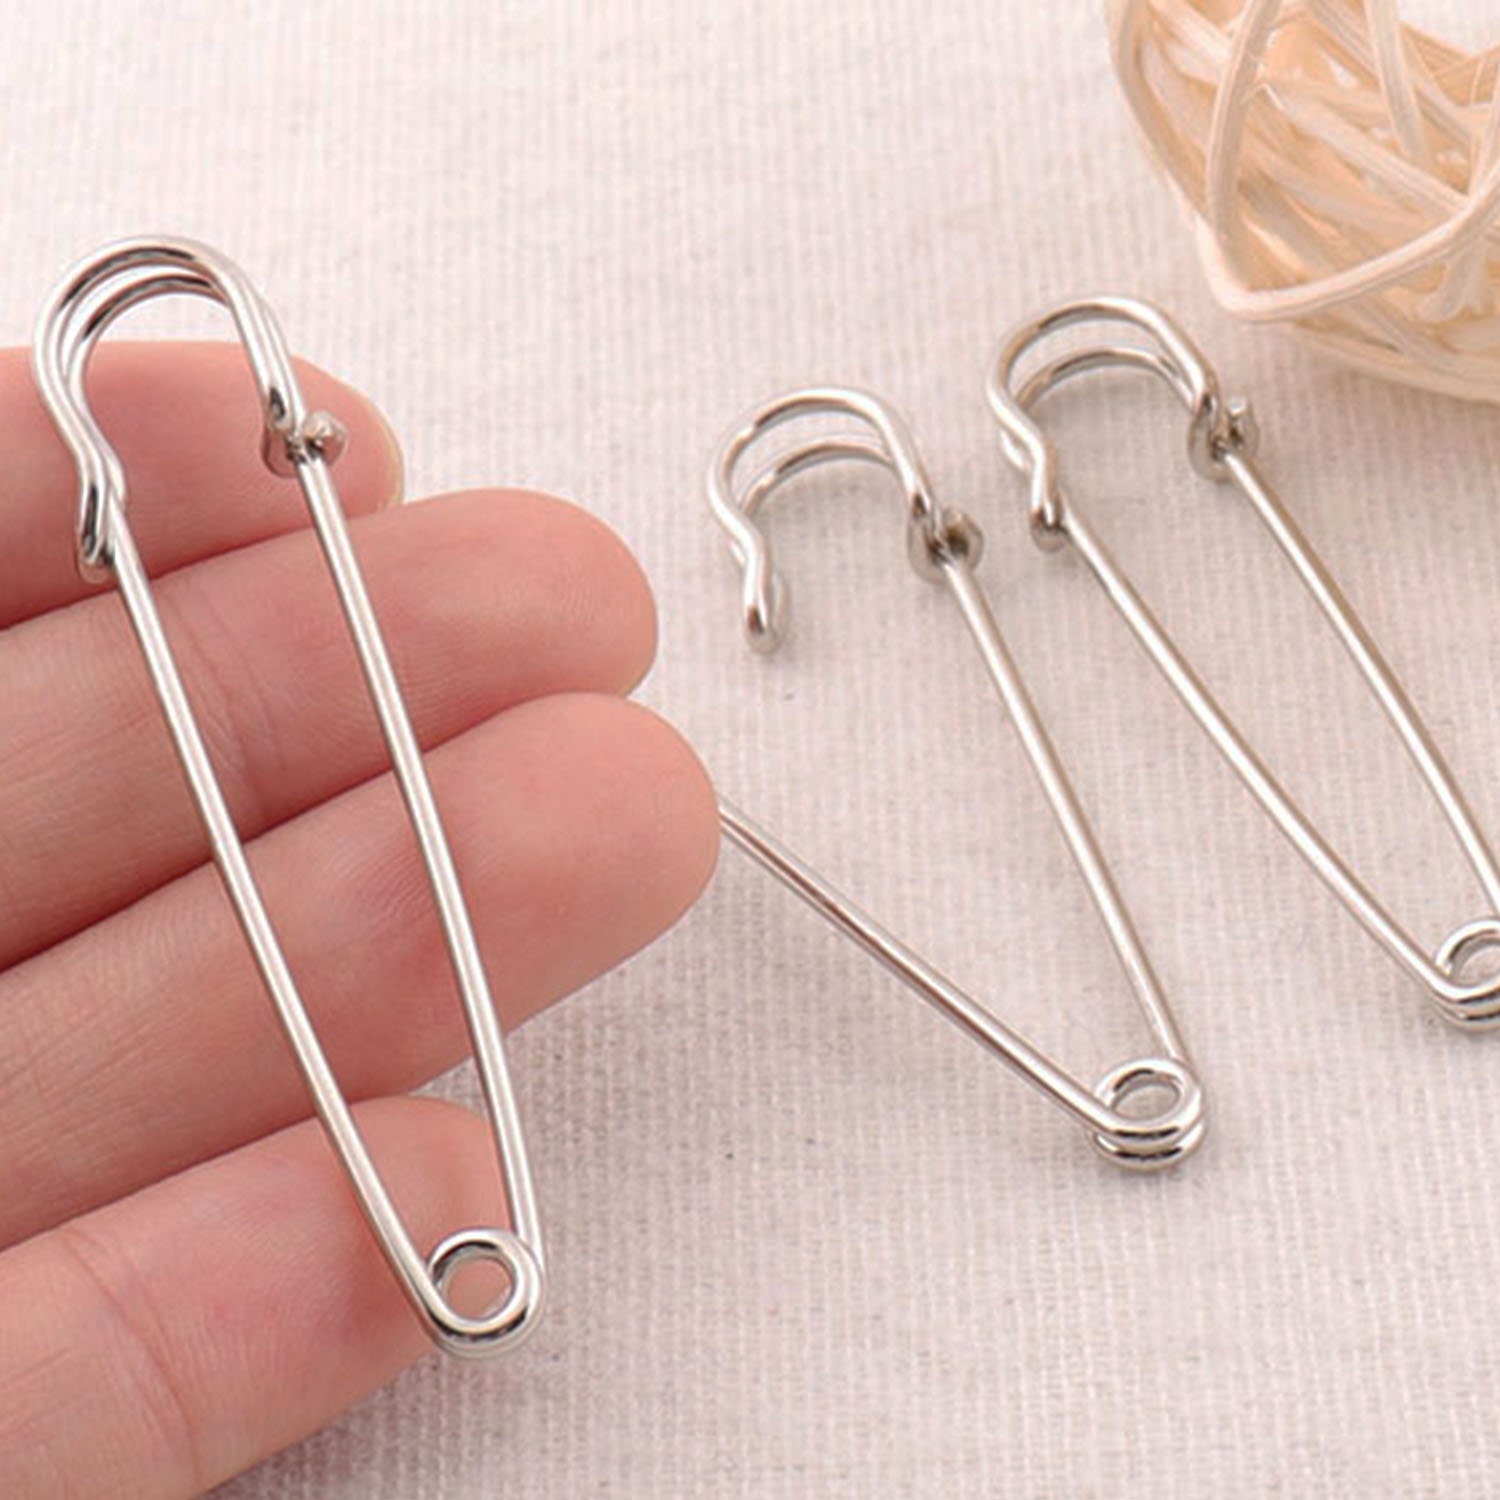 Rainbow Safety Pin,colored Safety Pins,25pcs Brooch Pin,unique